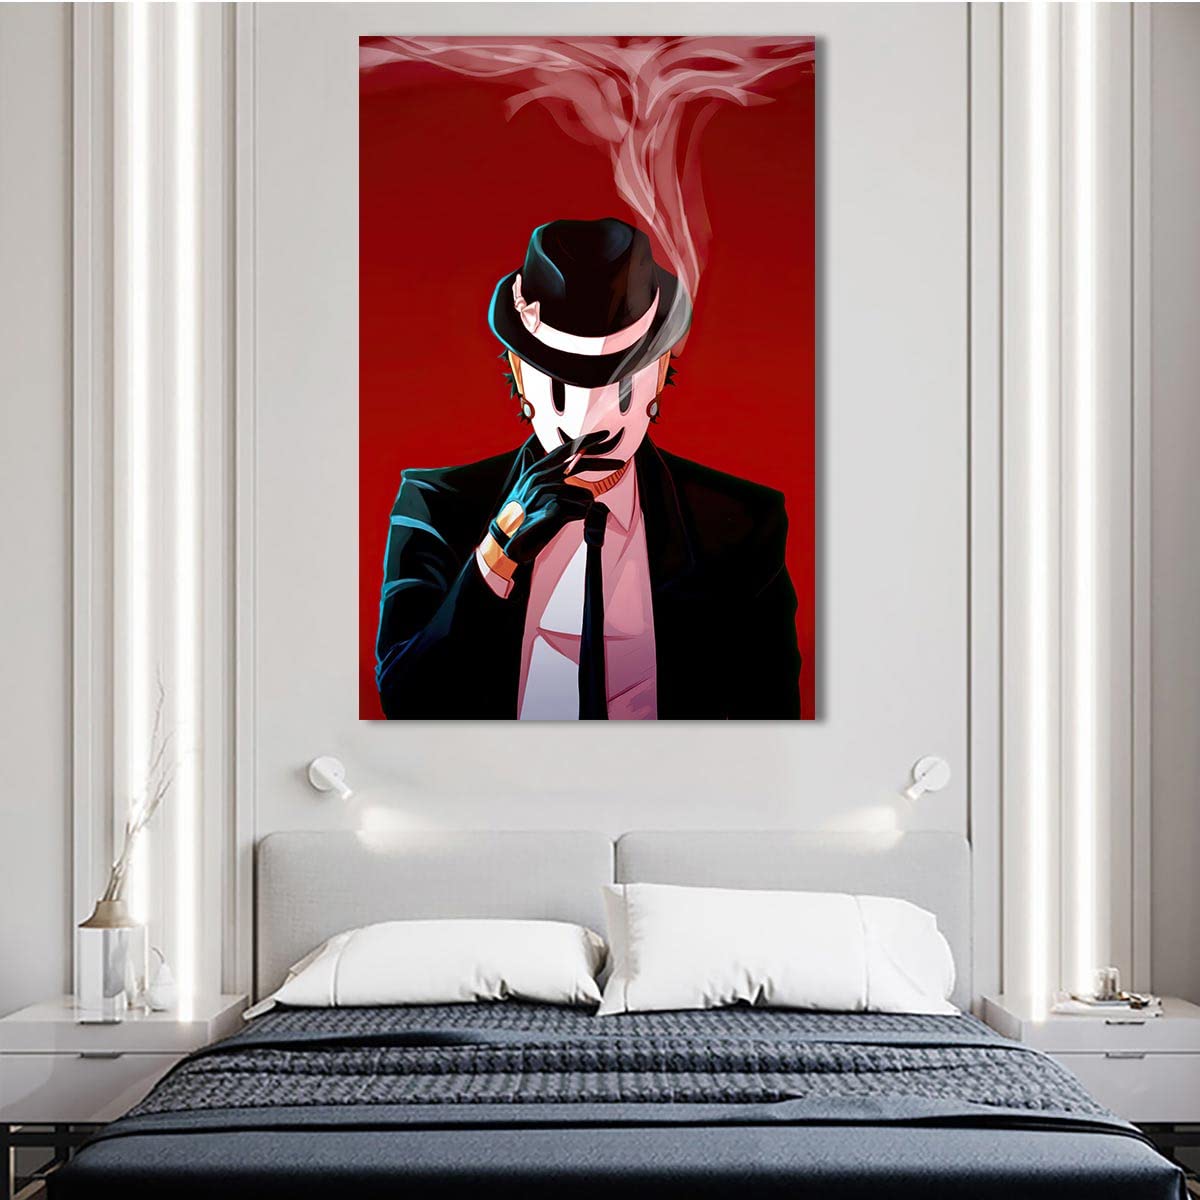 AFUT Rise Invasion Poster,Sniper Mask Man,Canvas Wall Art For Living Room Decor Aesthetic Vintage Posters & Prints Farmhouse Kitchen Wall Decor Preppy Room Decor Aesthetic Unframed 12x18 inches